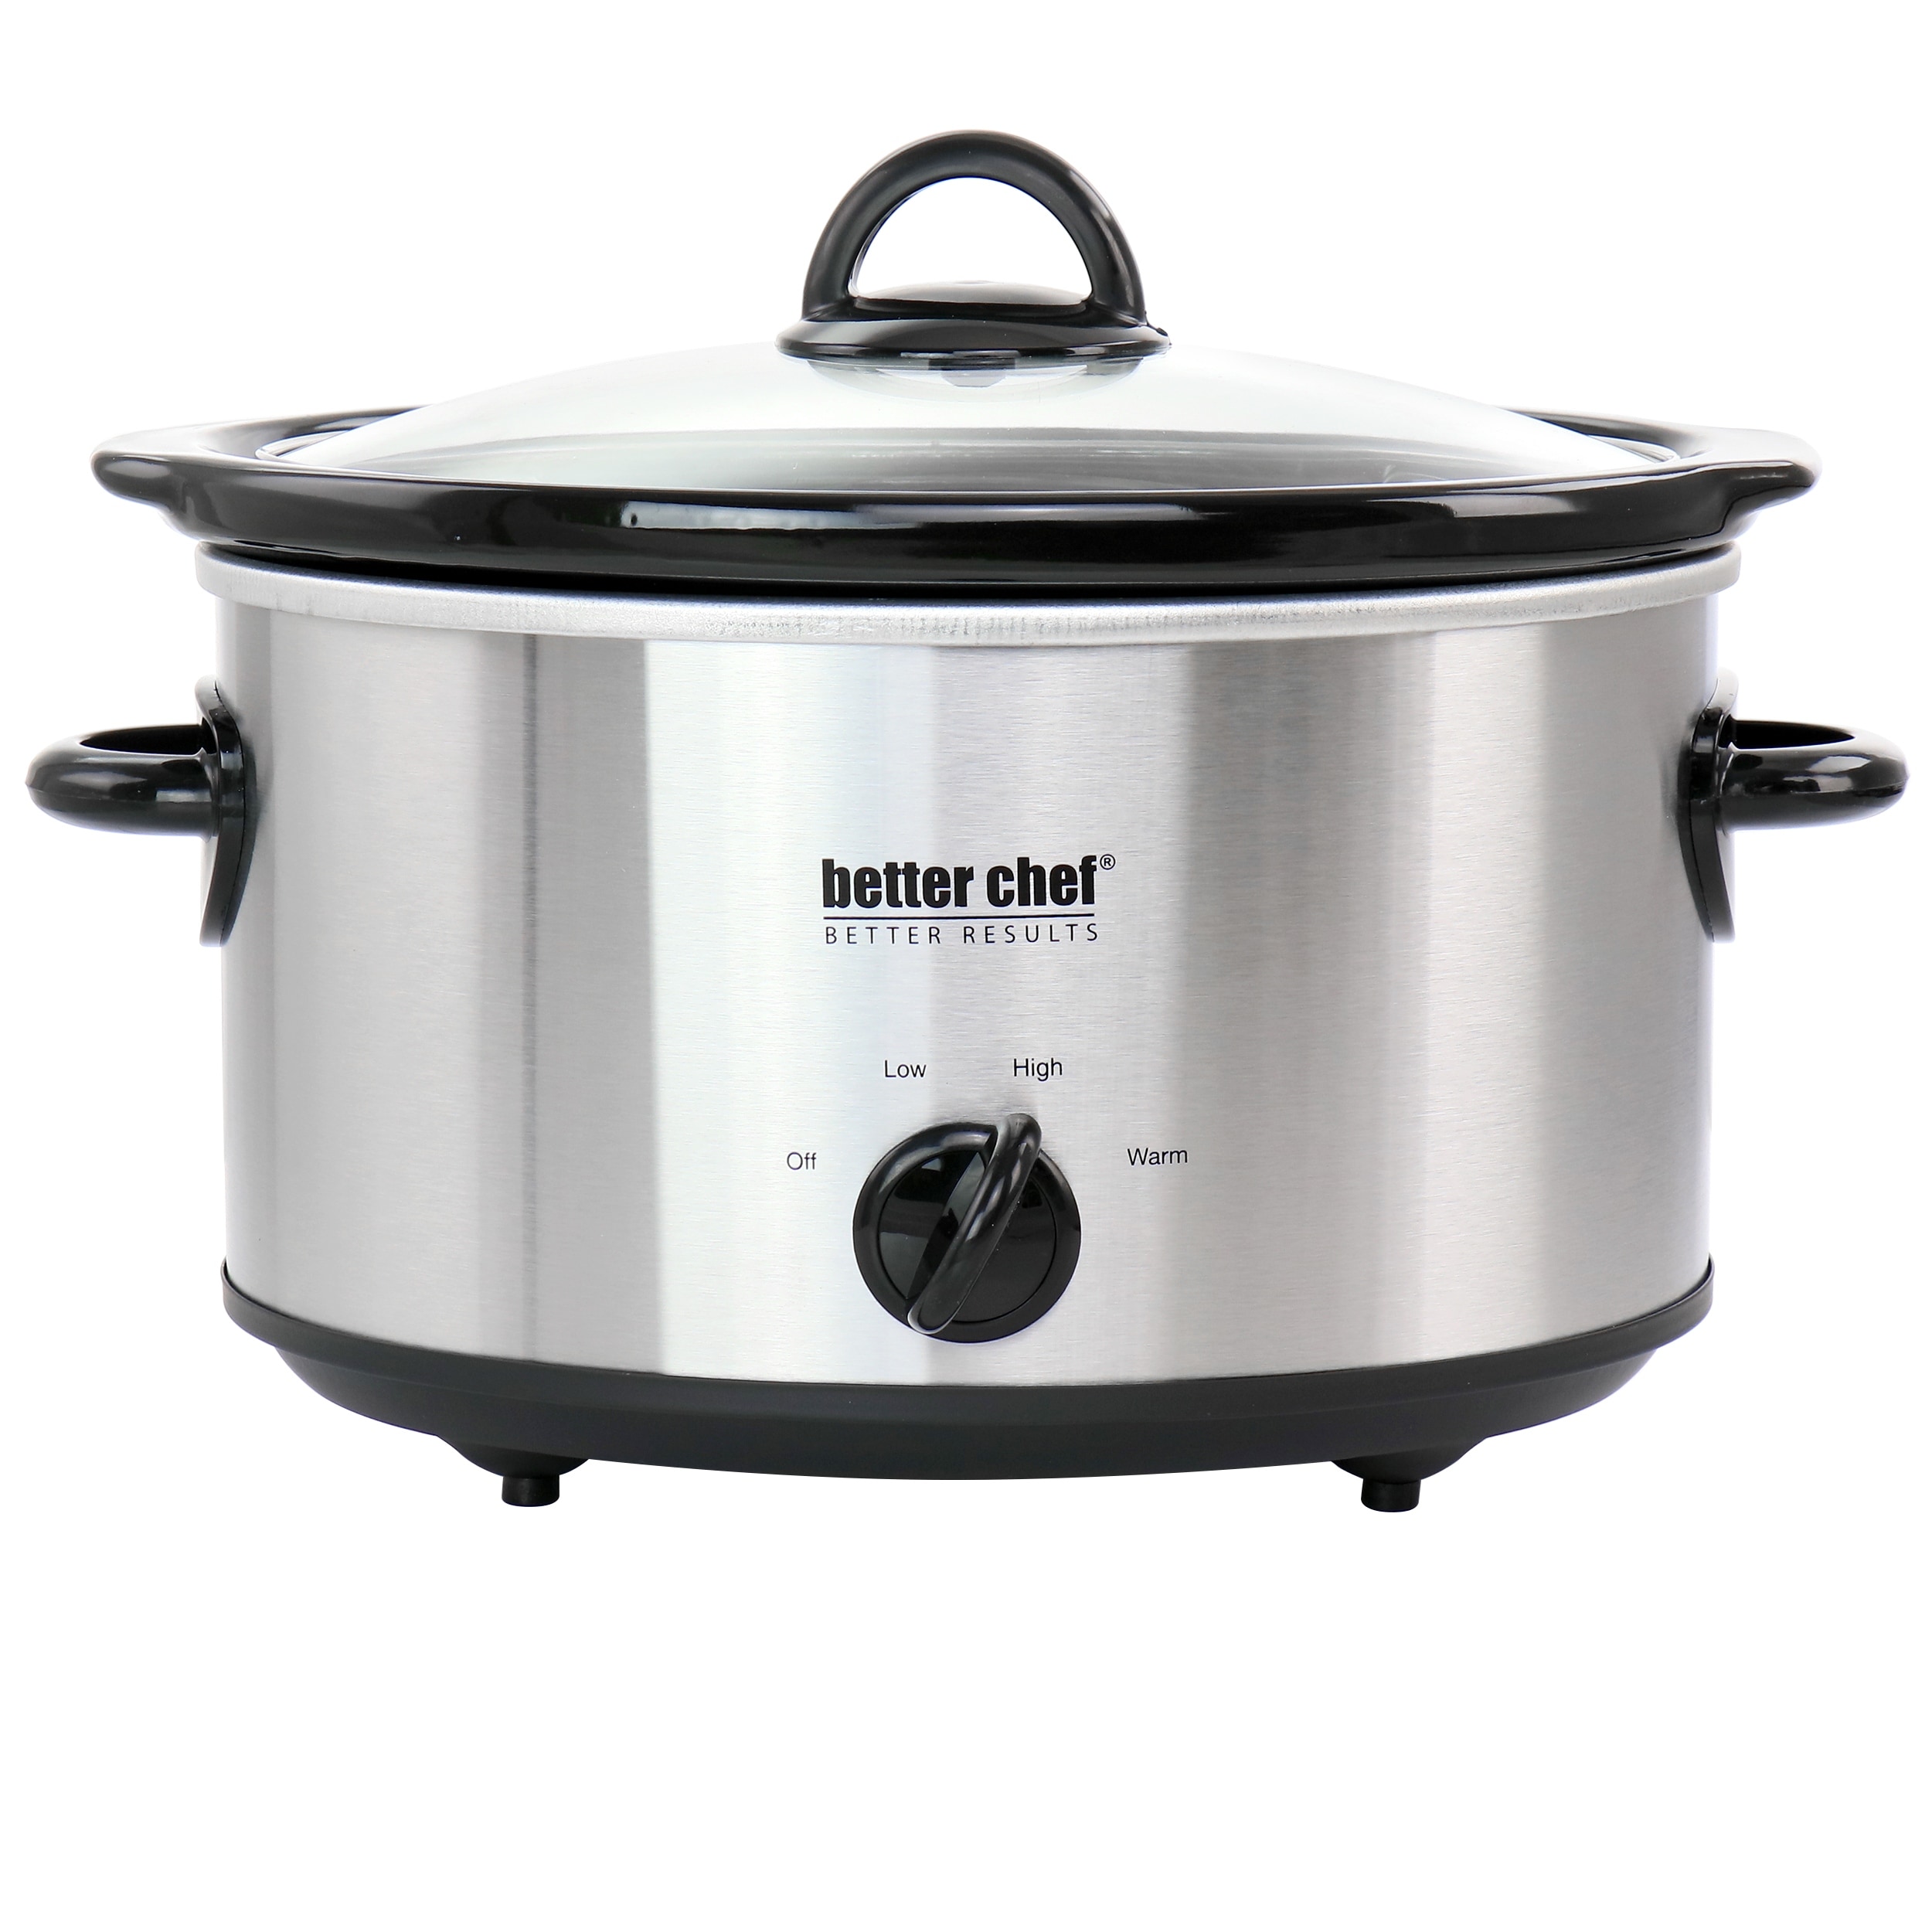 https://ak1.ostkcdn.com/images/products/is/images/direct/b9ba12a0195acb91ebd803b6b3b1e5a3d8e6f938/Better-Chef-4-Quart-Oval-Slow-Cooker-with-Removable-Stoneware-Crock.jpg